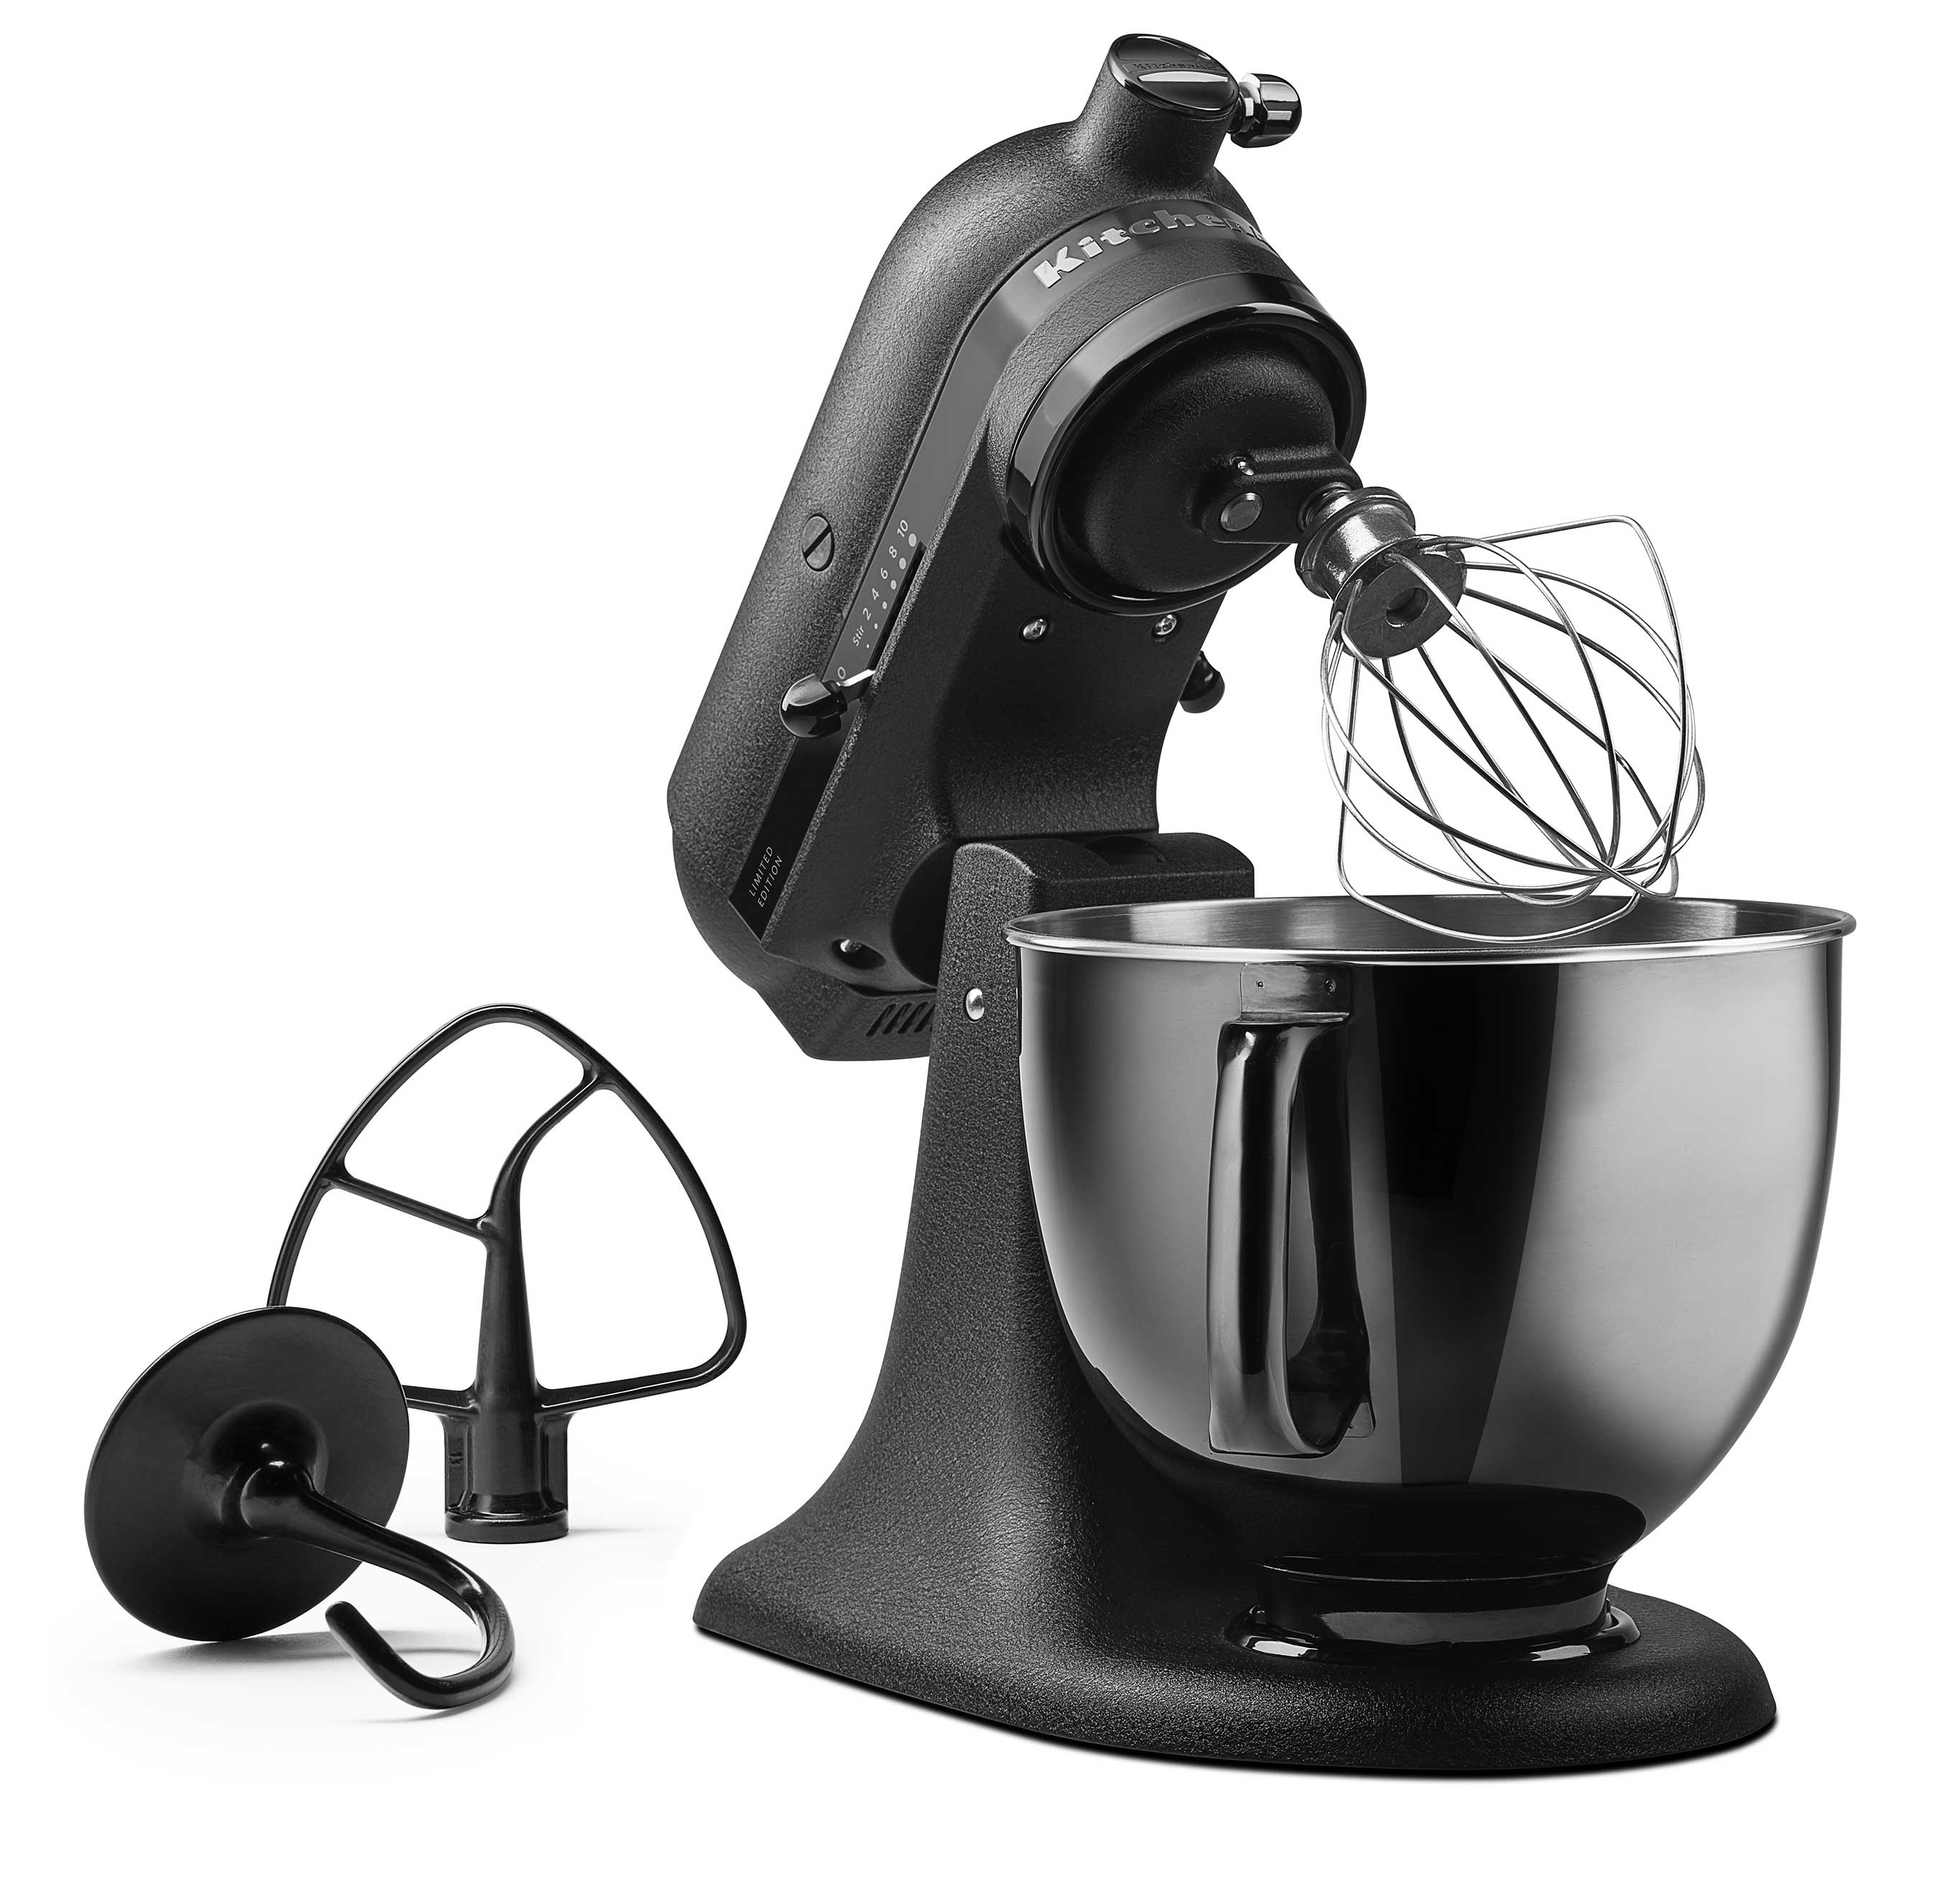 KitchenAid unveiled its first monochromatic Black Tie stand mixer as a limited edition offering. The new mixer marks both a celebration and evolution of this iconic kitchen essential’s 85 available colors and finishes.